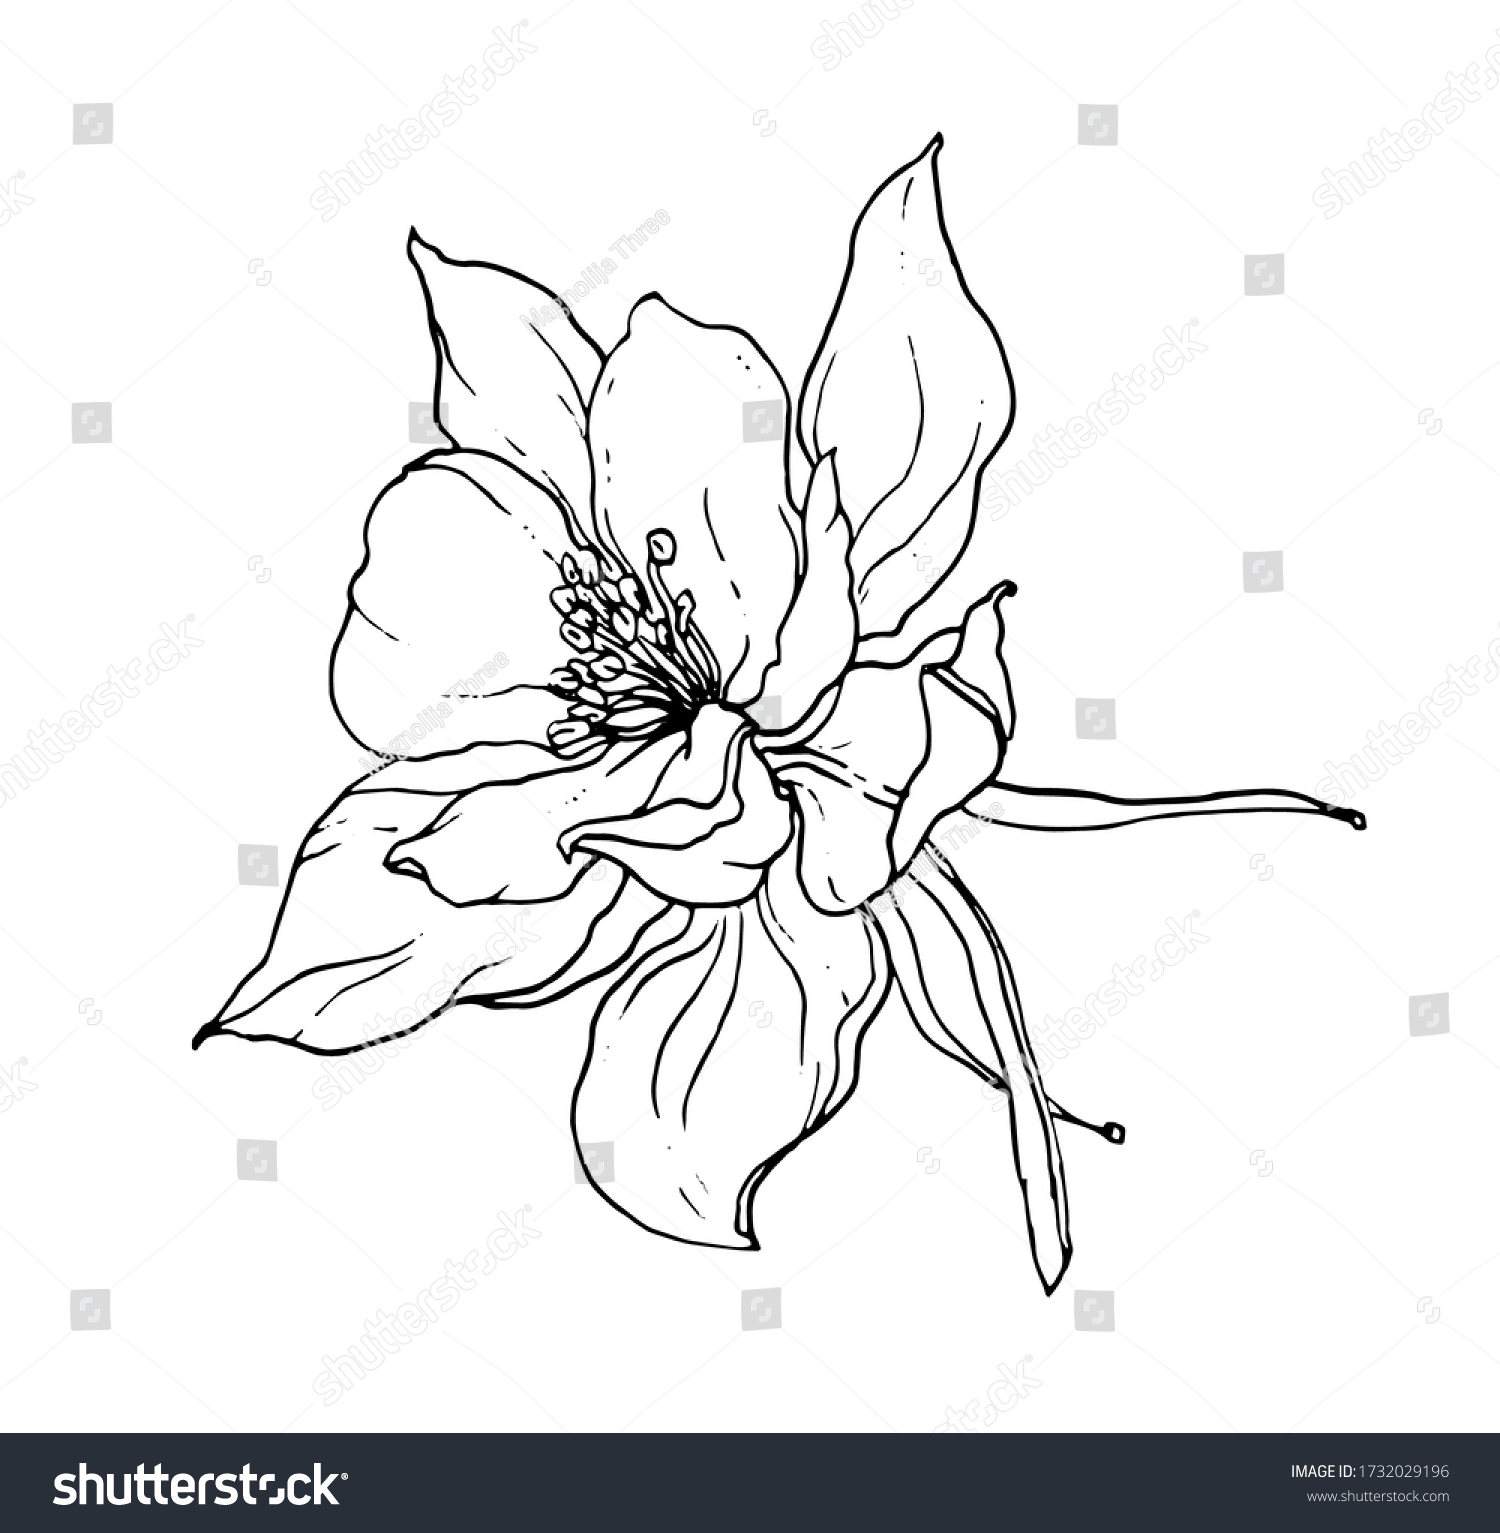 Columbine aquilegia northern flower blossom. Isolated vector botanical illustration: retro, vintage, hand drawn, black and white, outline. For wedding invitation, card, print, tattoo. Japanese style. #1732029196